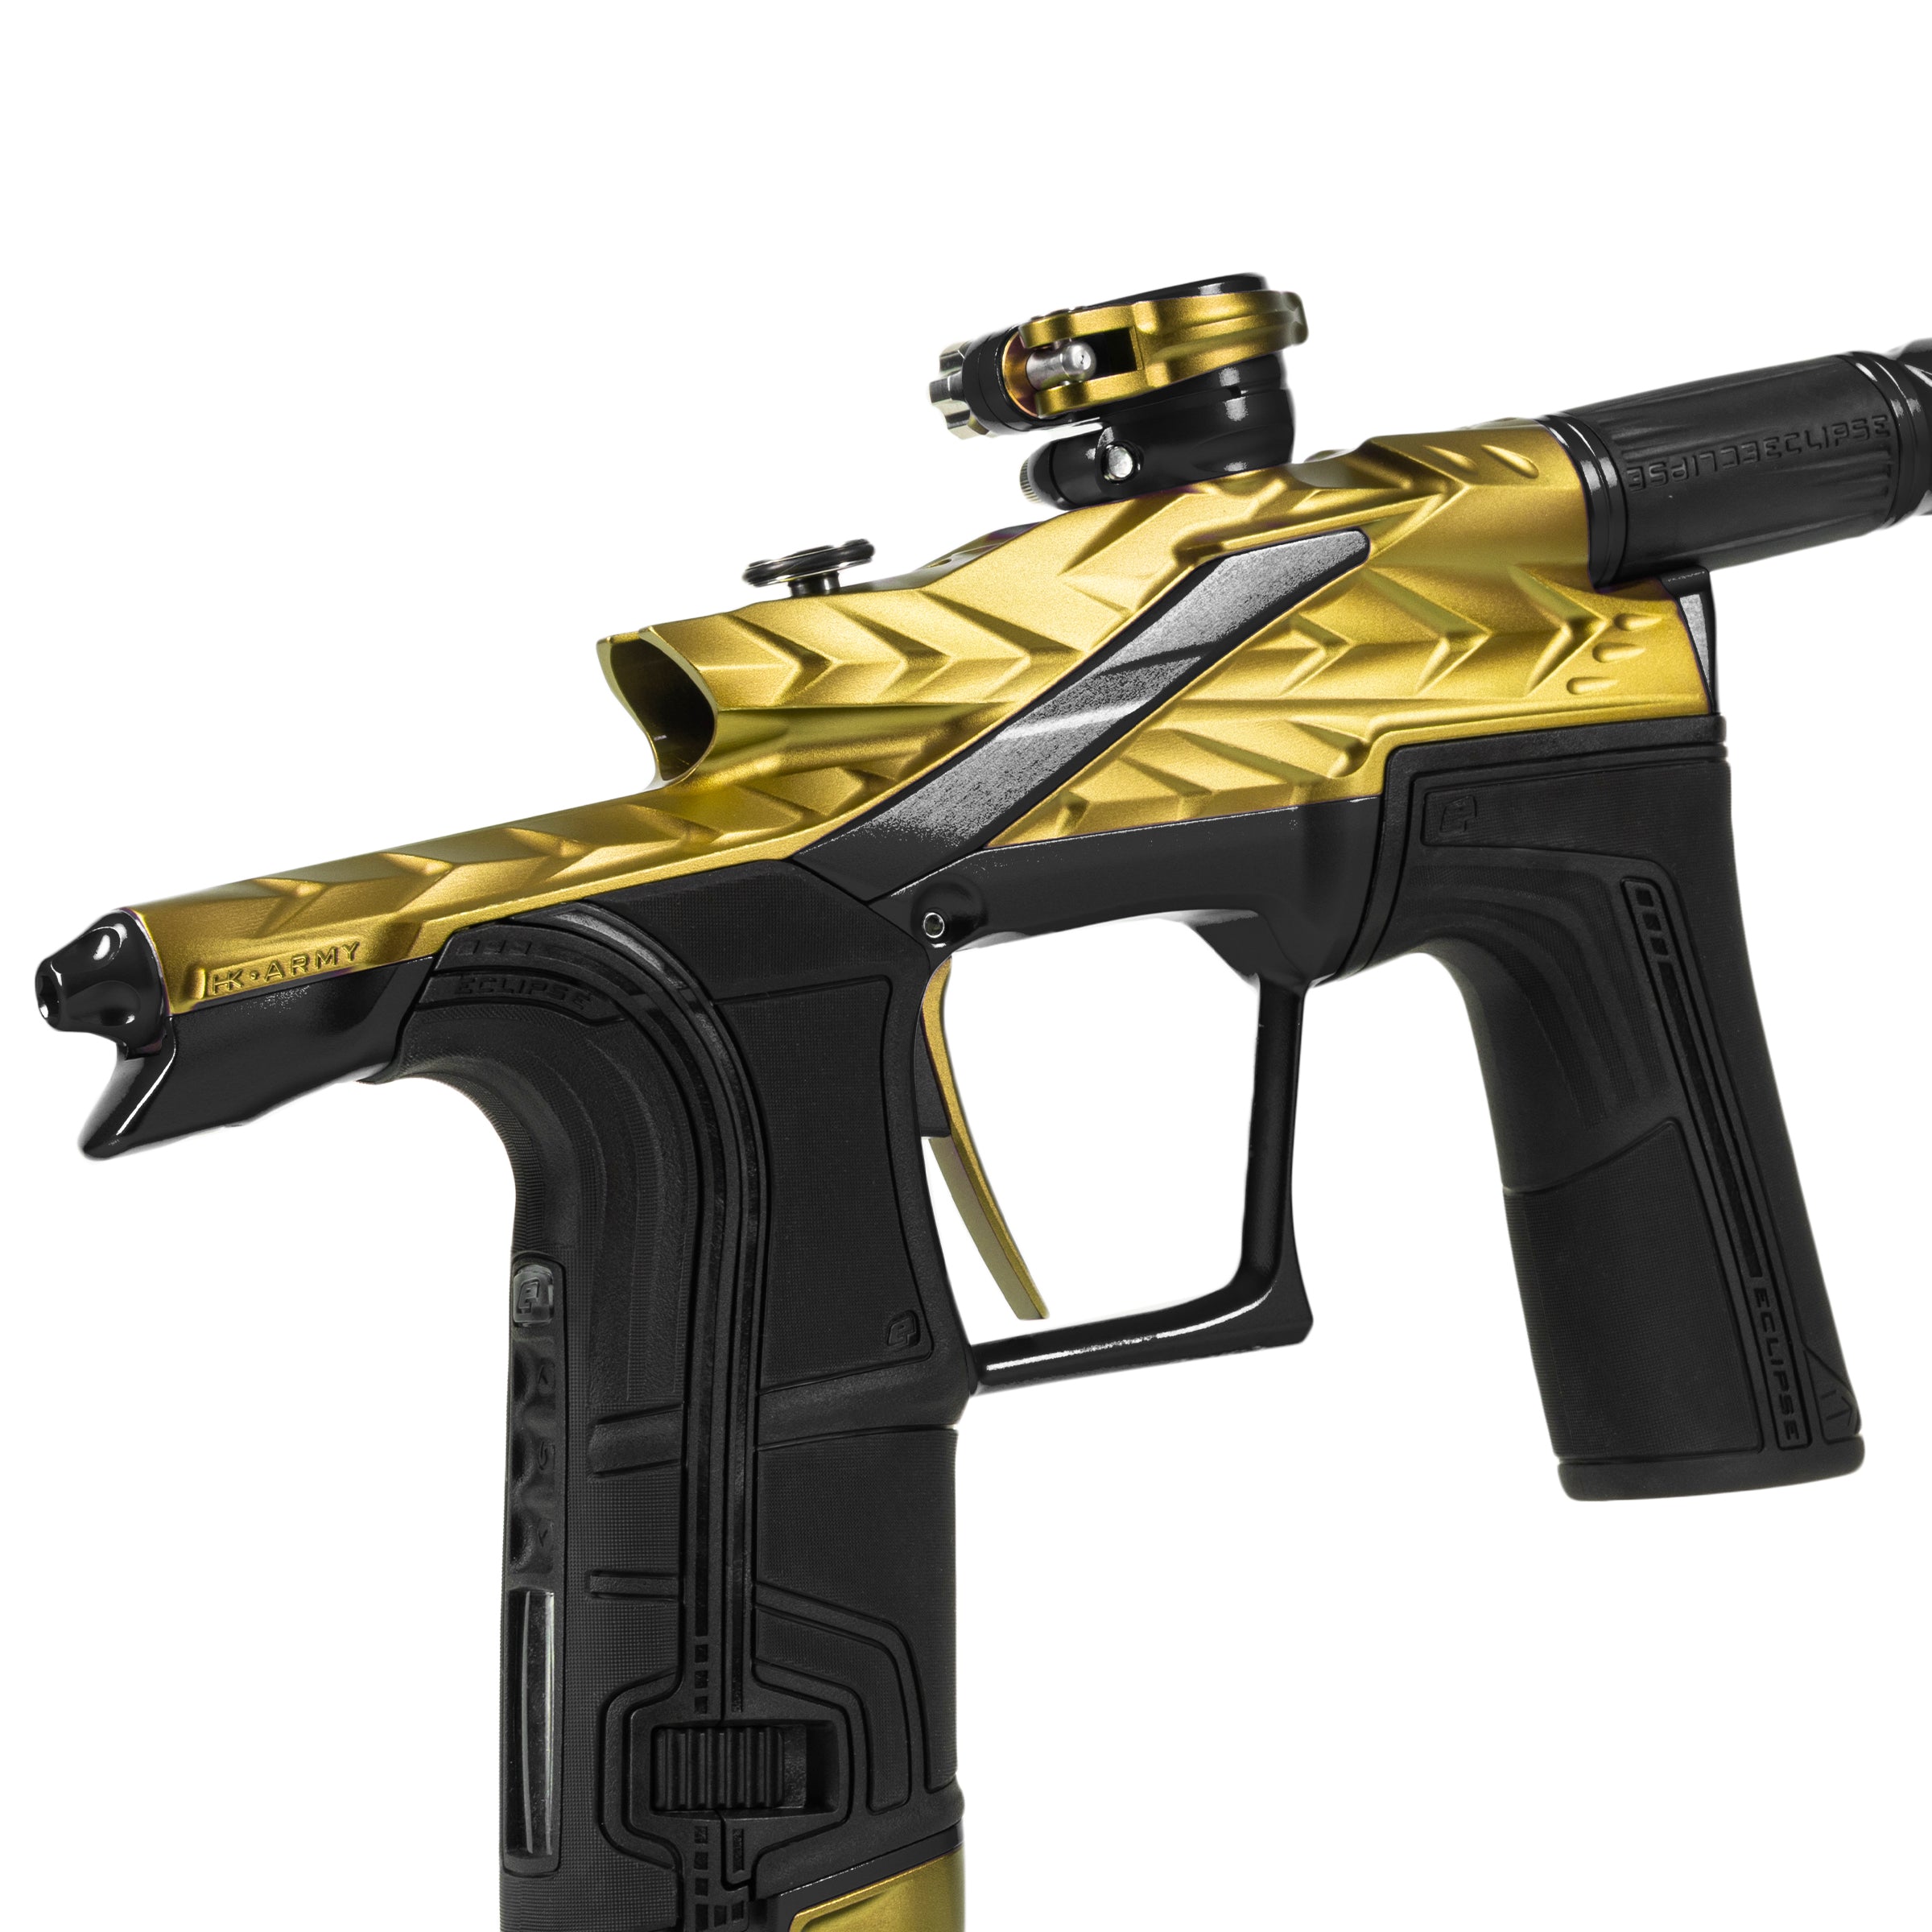 Planet Eclipse Ego LV2 Paintball Gun - Review 